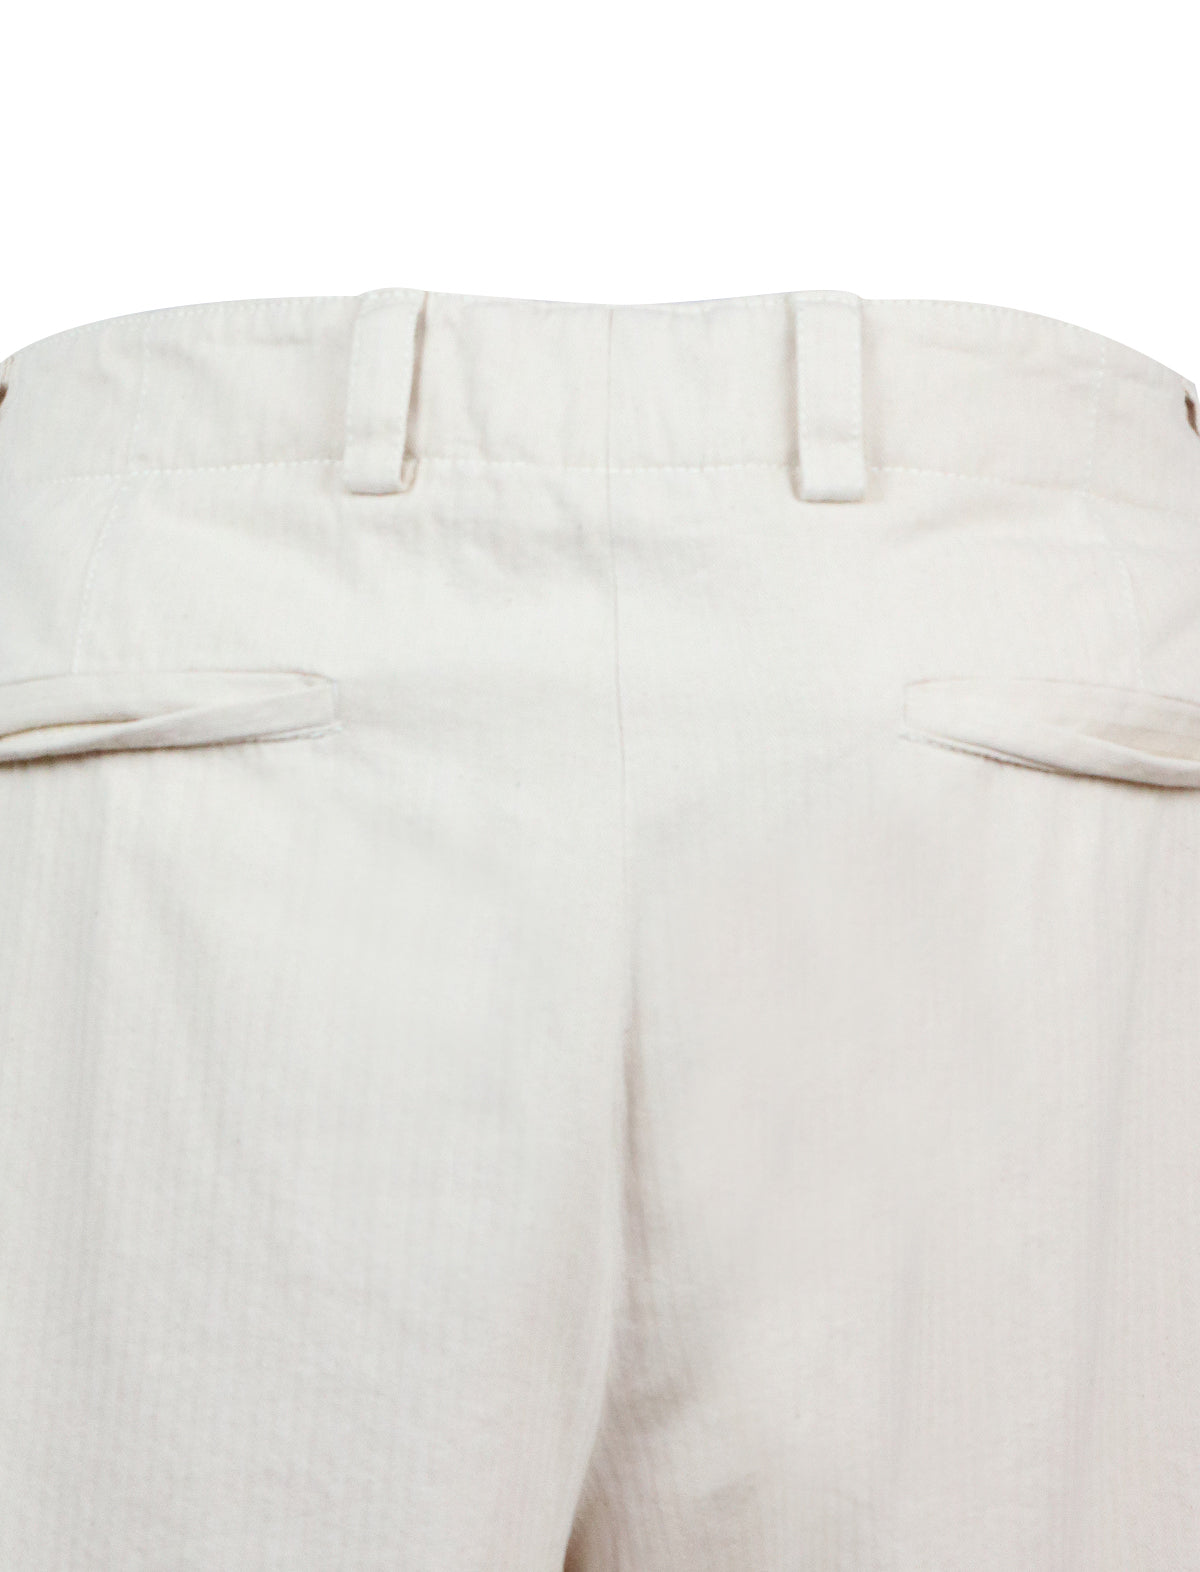 CARUSO Pants in Off White